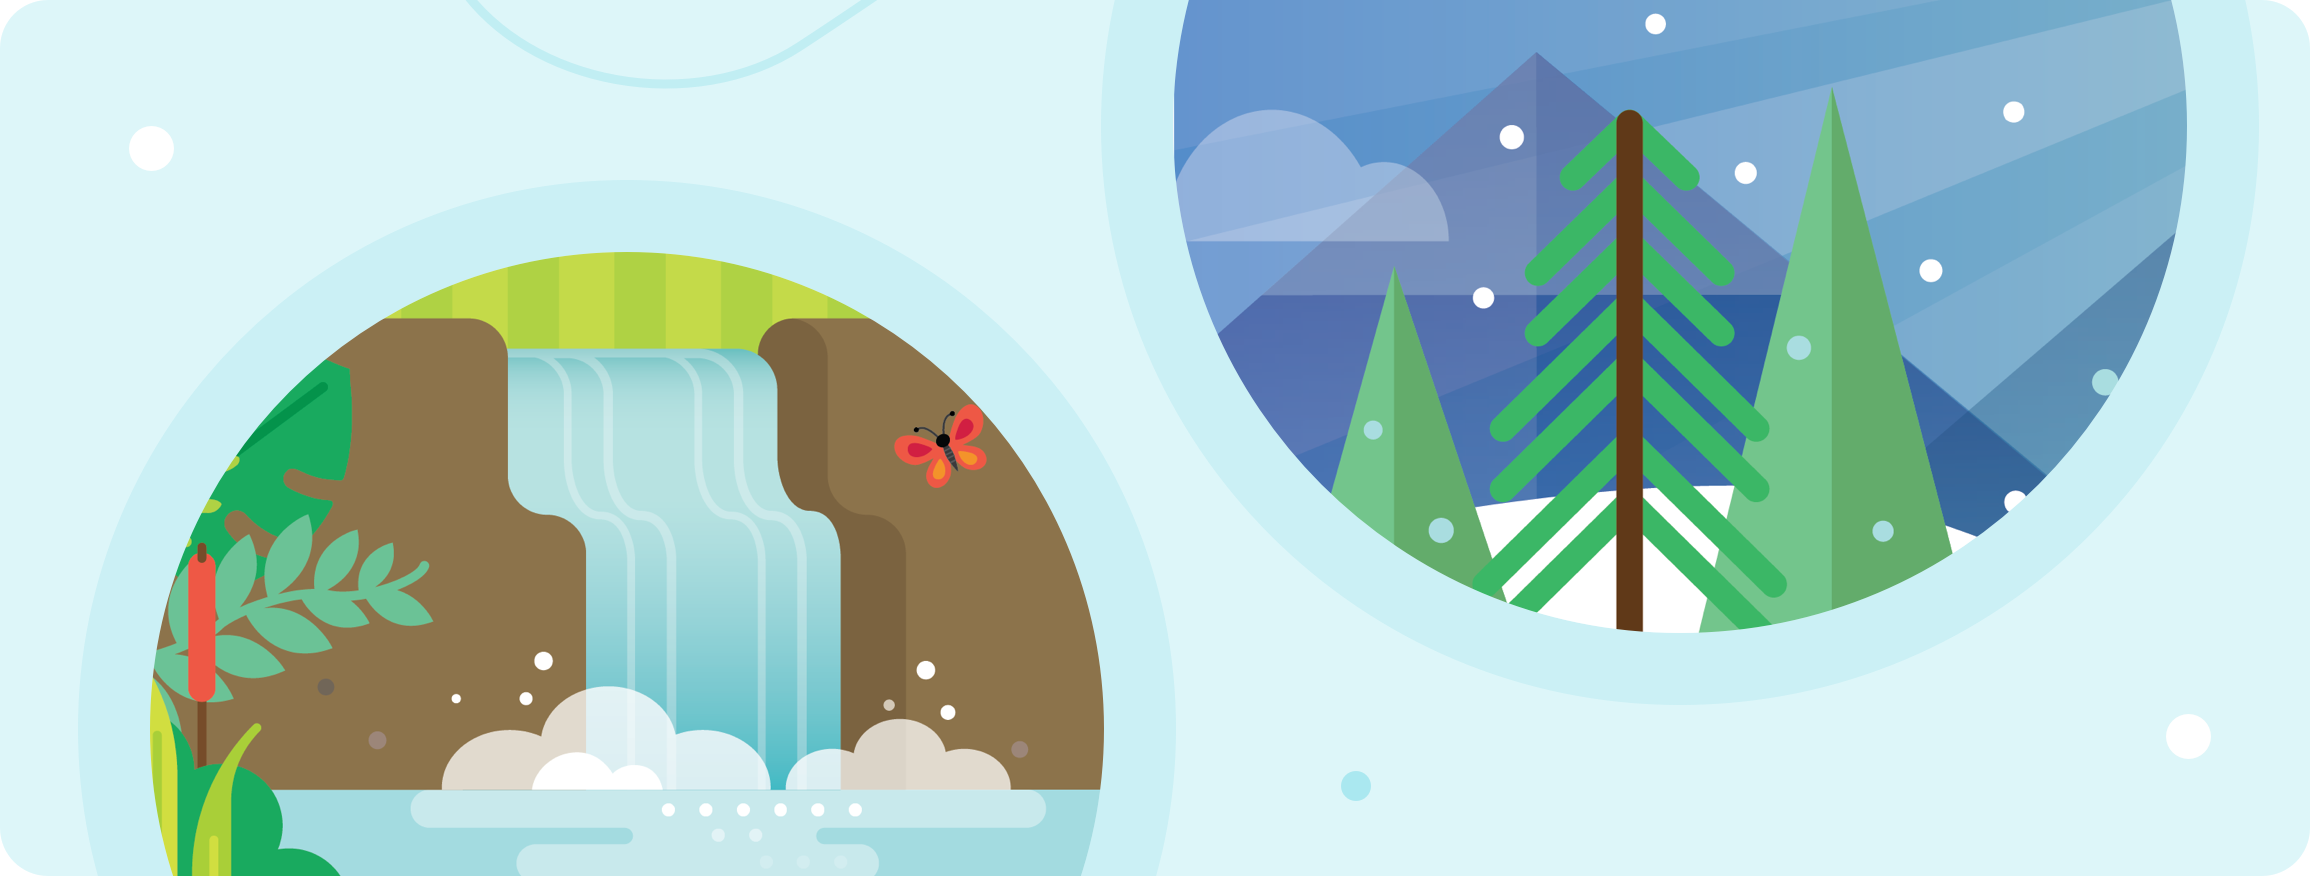 Seasonal challenges graphic showing a waterfall and forest. 